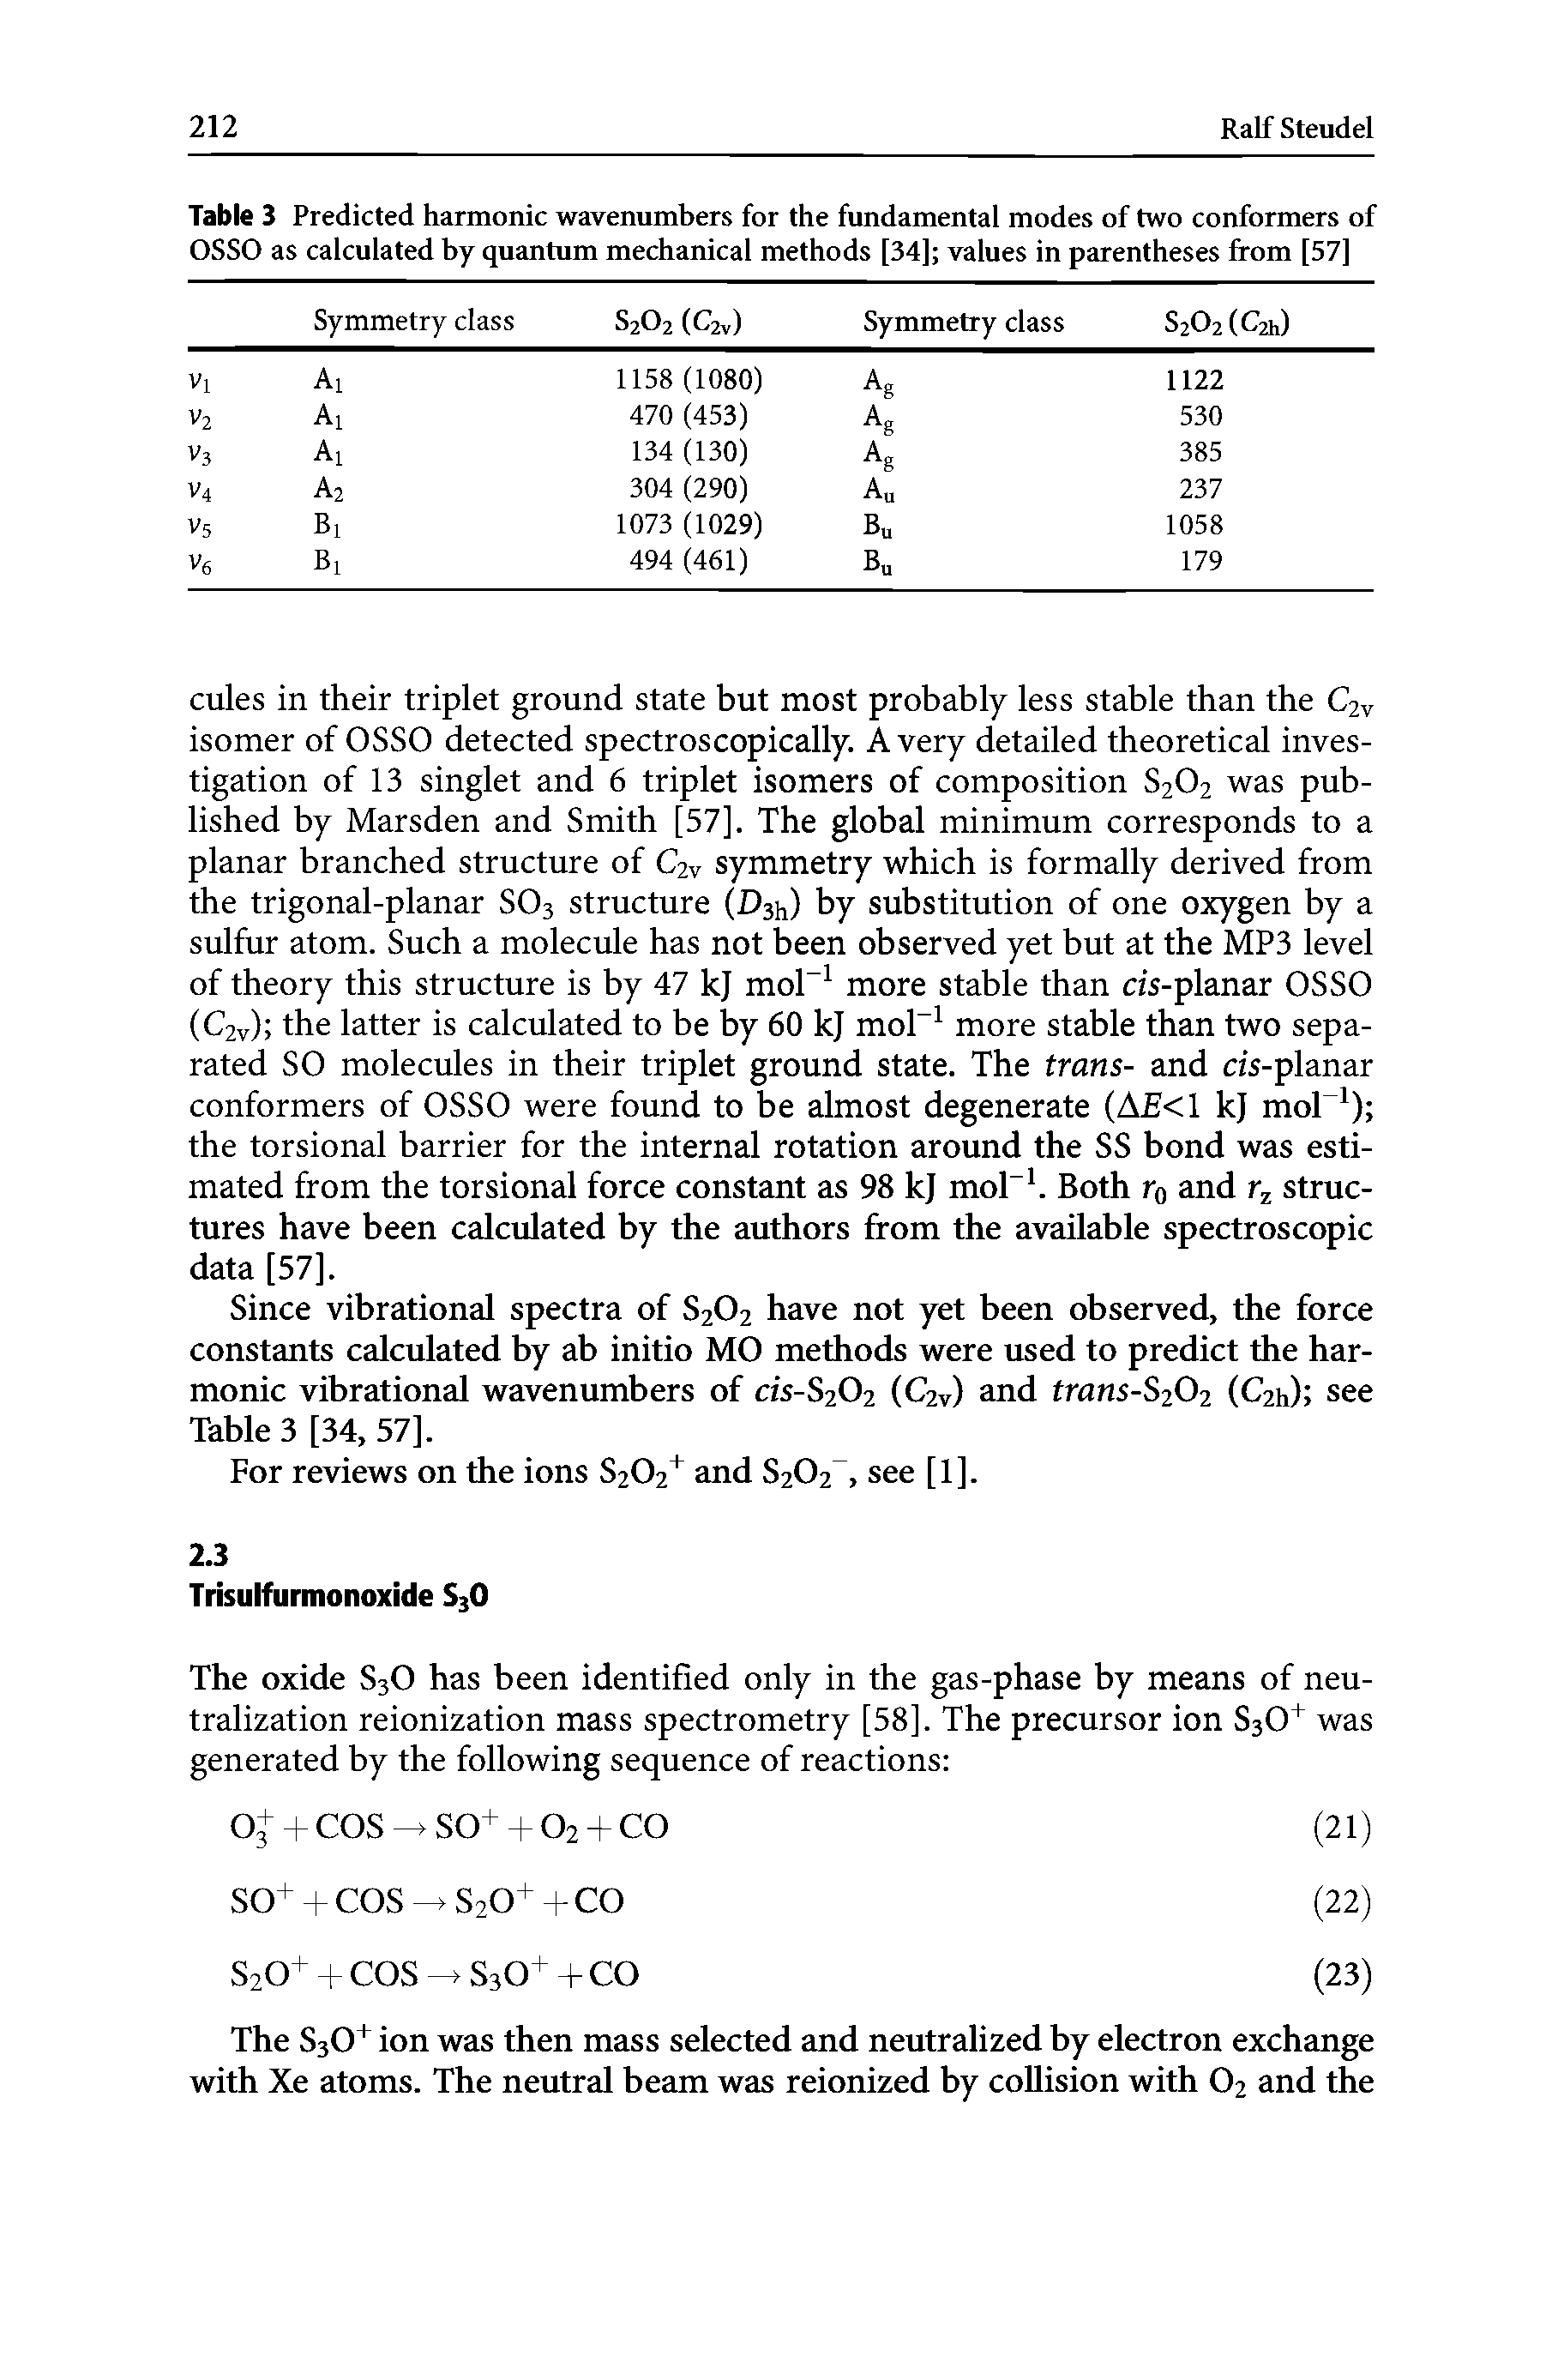 Table 3 Predicted harmonic wavenumbers for the fundamental modes of two conformers of OSSO as calculated by quantum mechanical methods [34] values in parentheses from [57]...